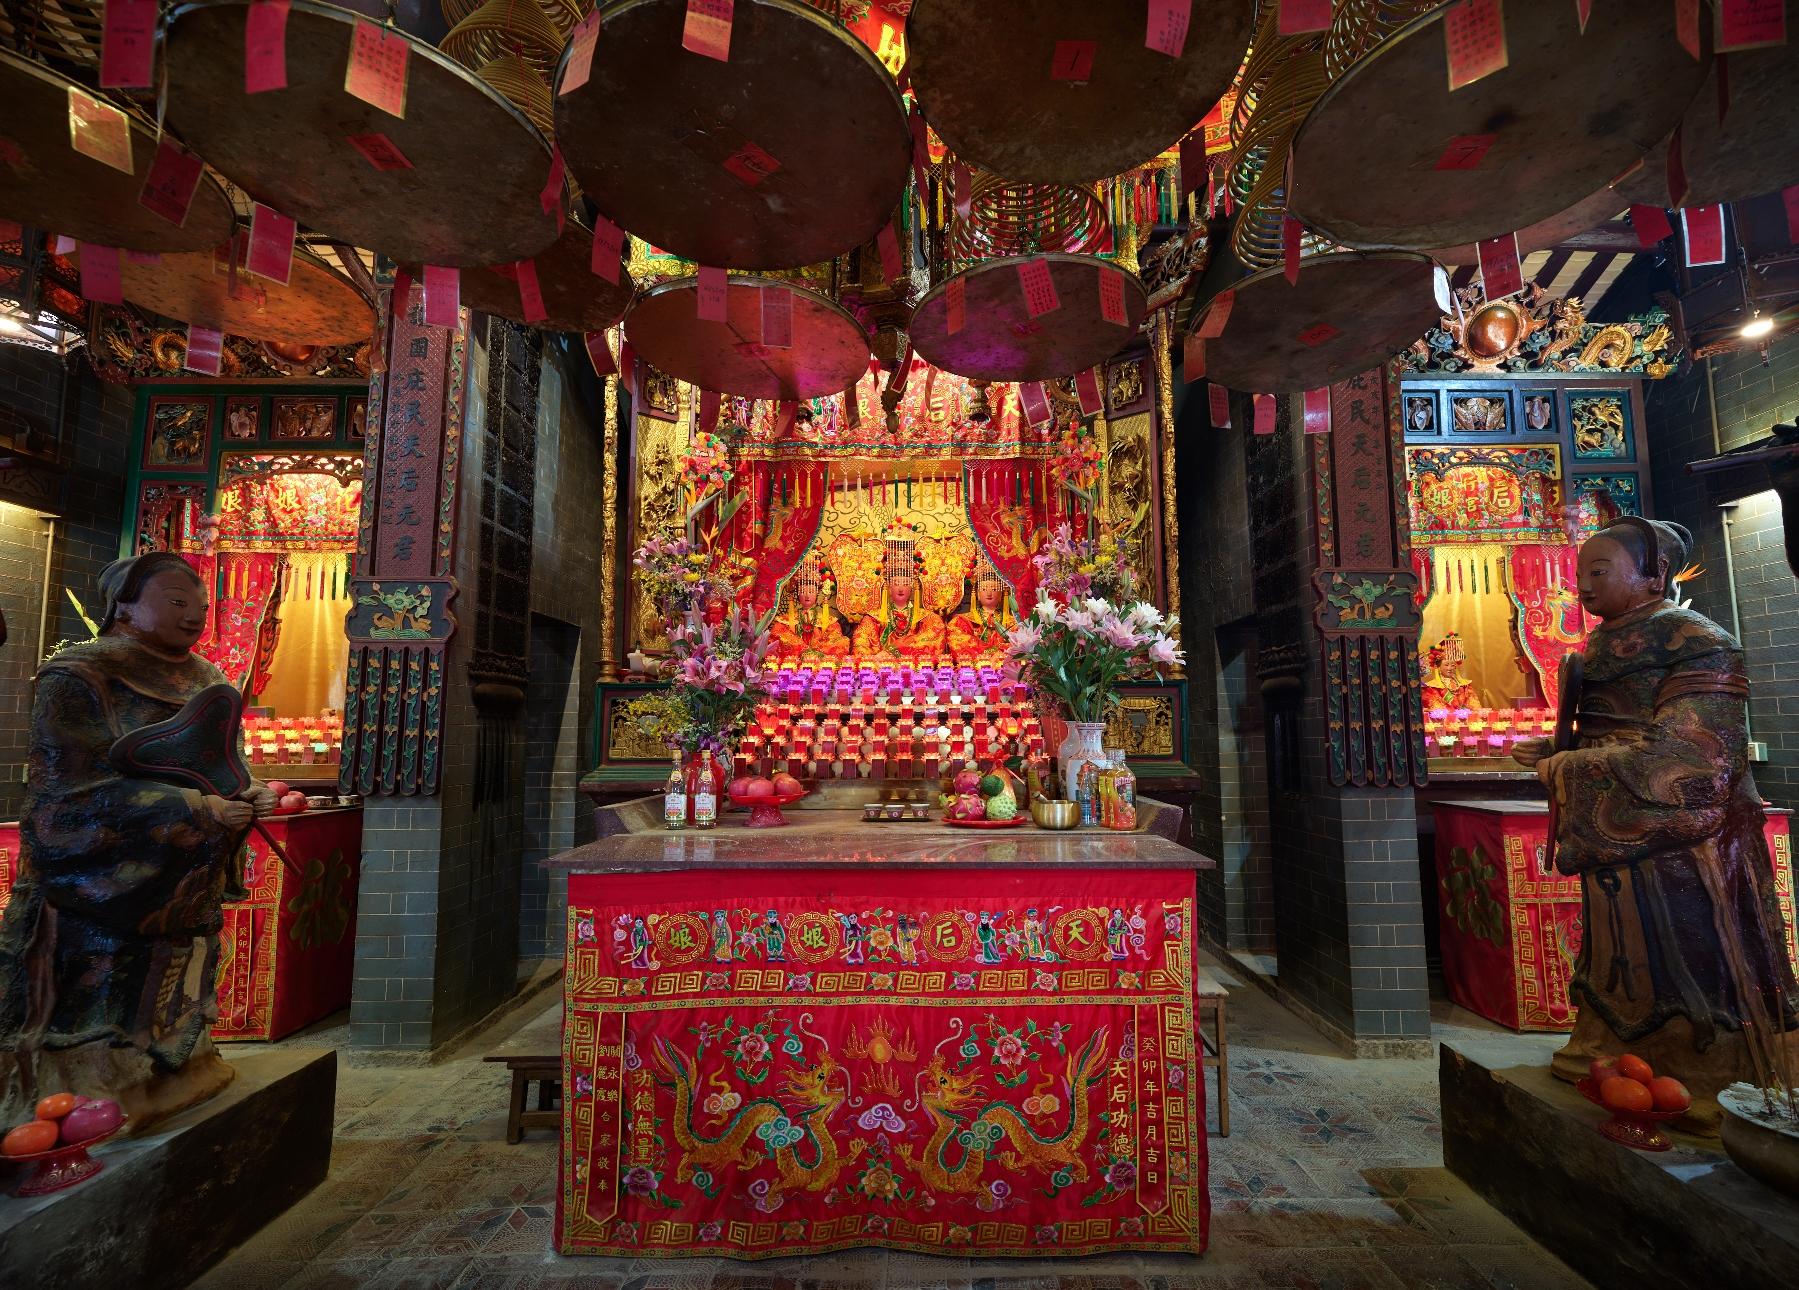 The Government gazetted today (October 20) the declaration of the Tin Hau Temple at Joss House Bay (the Temple) in Sai Kung as a monument under the Antiquities and Monuments Ordinance. Photo shows the statues of Tin Hau on the altar in the rear hall of the Temple.